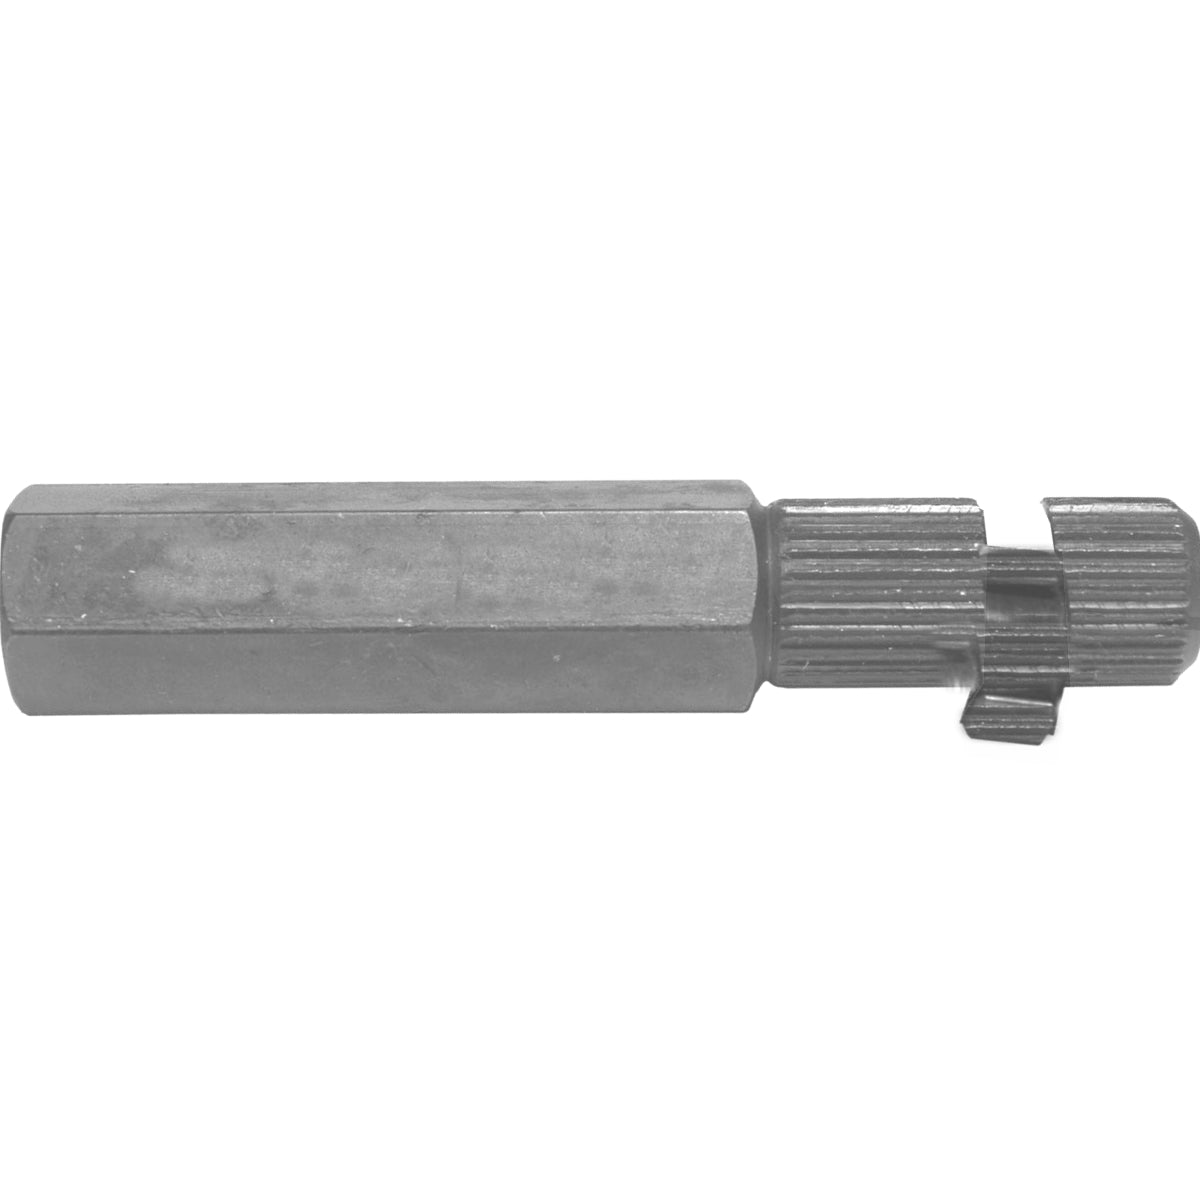 Superior 05212 Internal Pipe Wrench, 1/2"